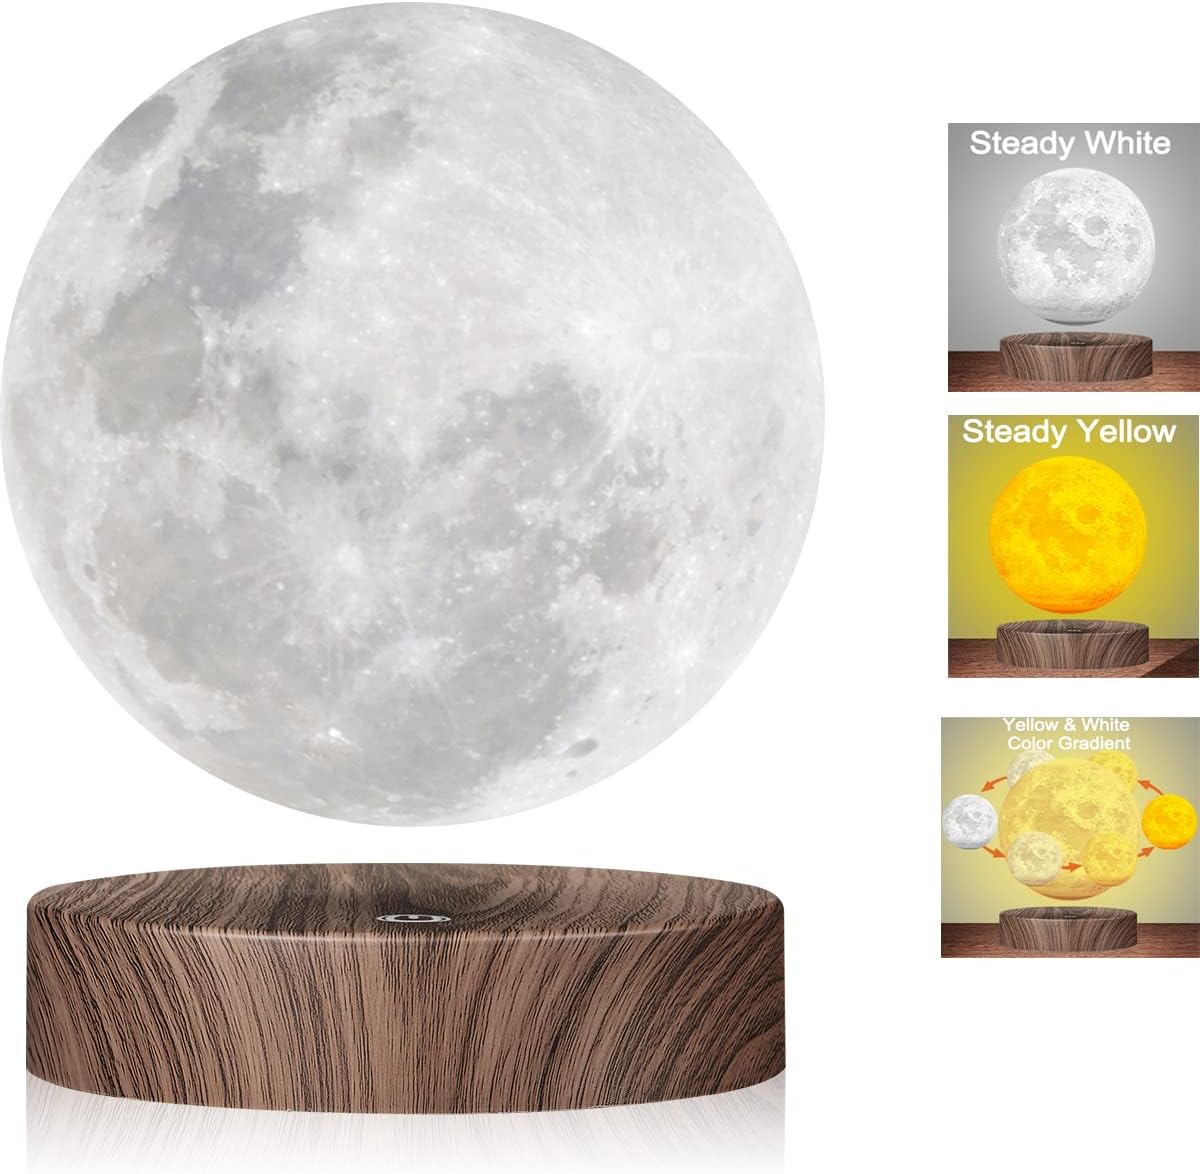 Levitating Moon Lamp,Floating and Spinning in Air Freely with Luxury Wooden Base 